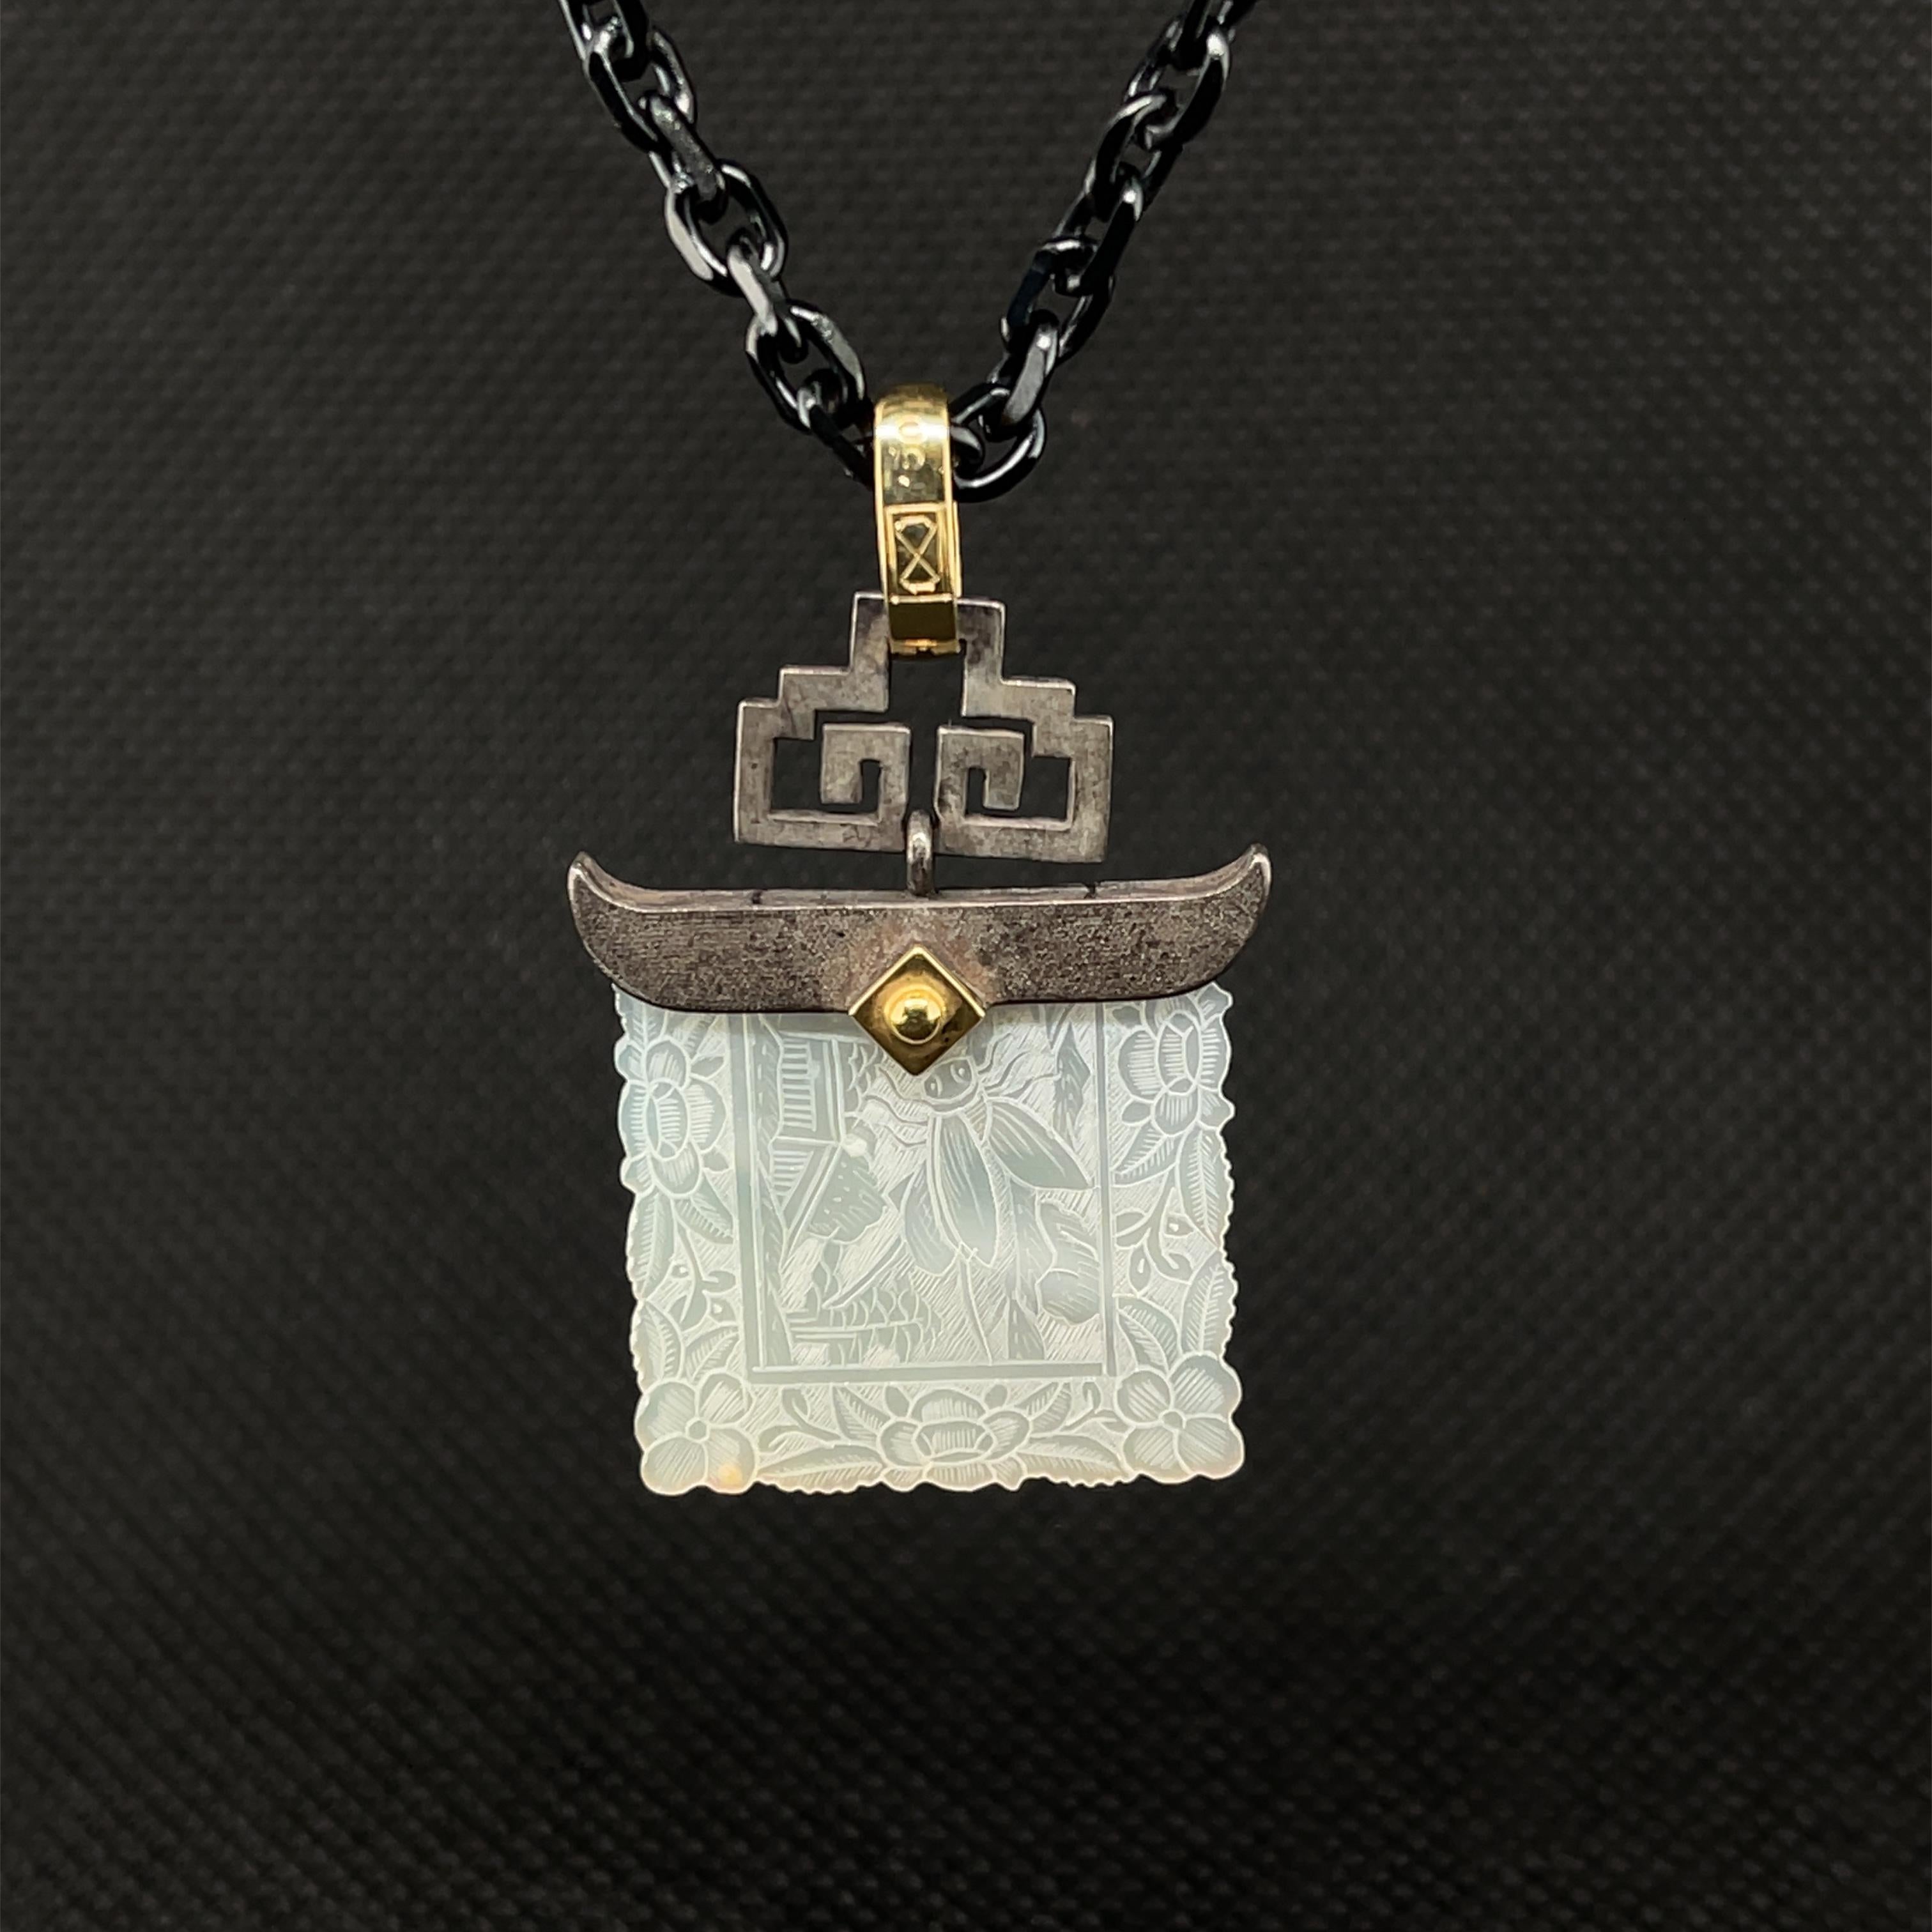 This pretty pendant features an antique, mother-of-pearl Chinese gambling counter dating back to the 18th Century. The square gaming counter with scalloped edges is set in a striking blackened silver setting with curved ends and a design that is